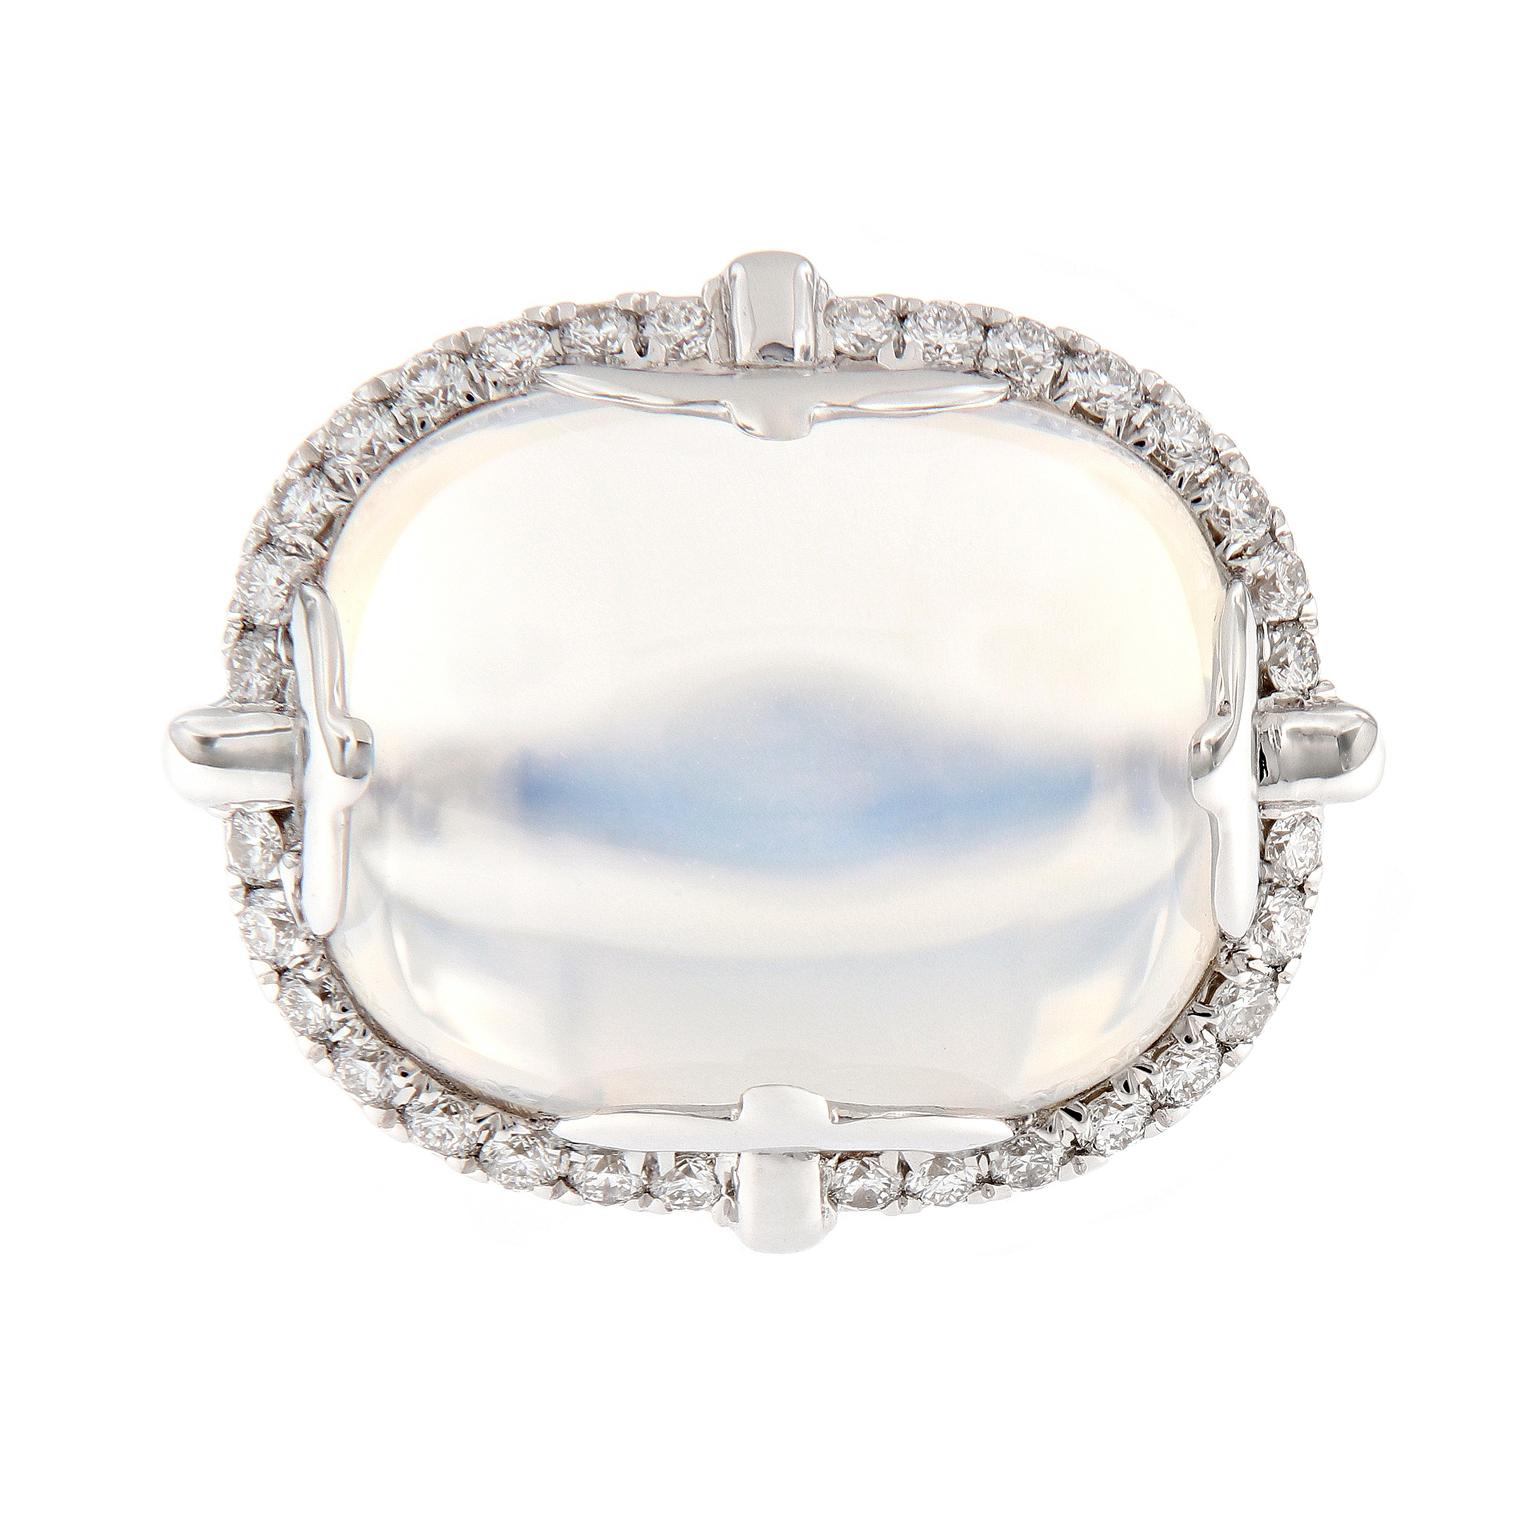 Be the Rock Star that you are wearing this ring! Like the music, the Rock ‘n Roll collection is electric in color with silhouettes that may bring out the rock star in you! This ring centers around a 13.59 carat cabochon moon quartz and is surrounded